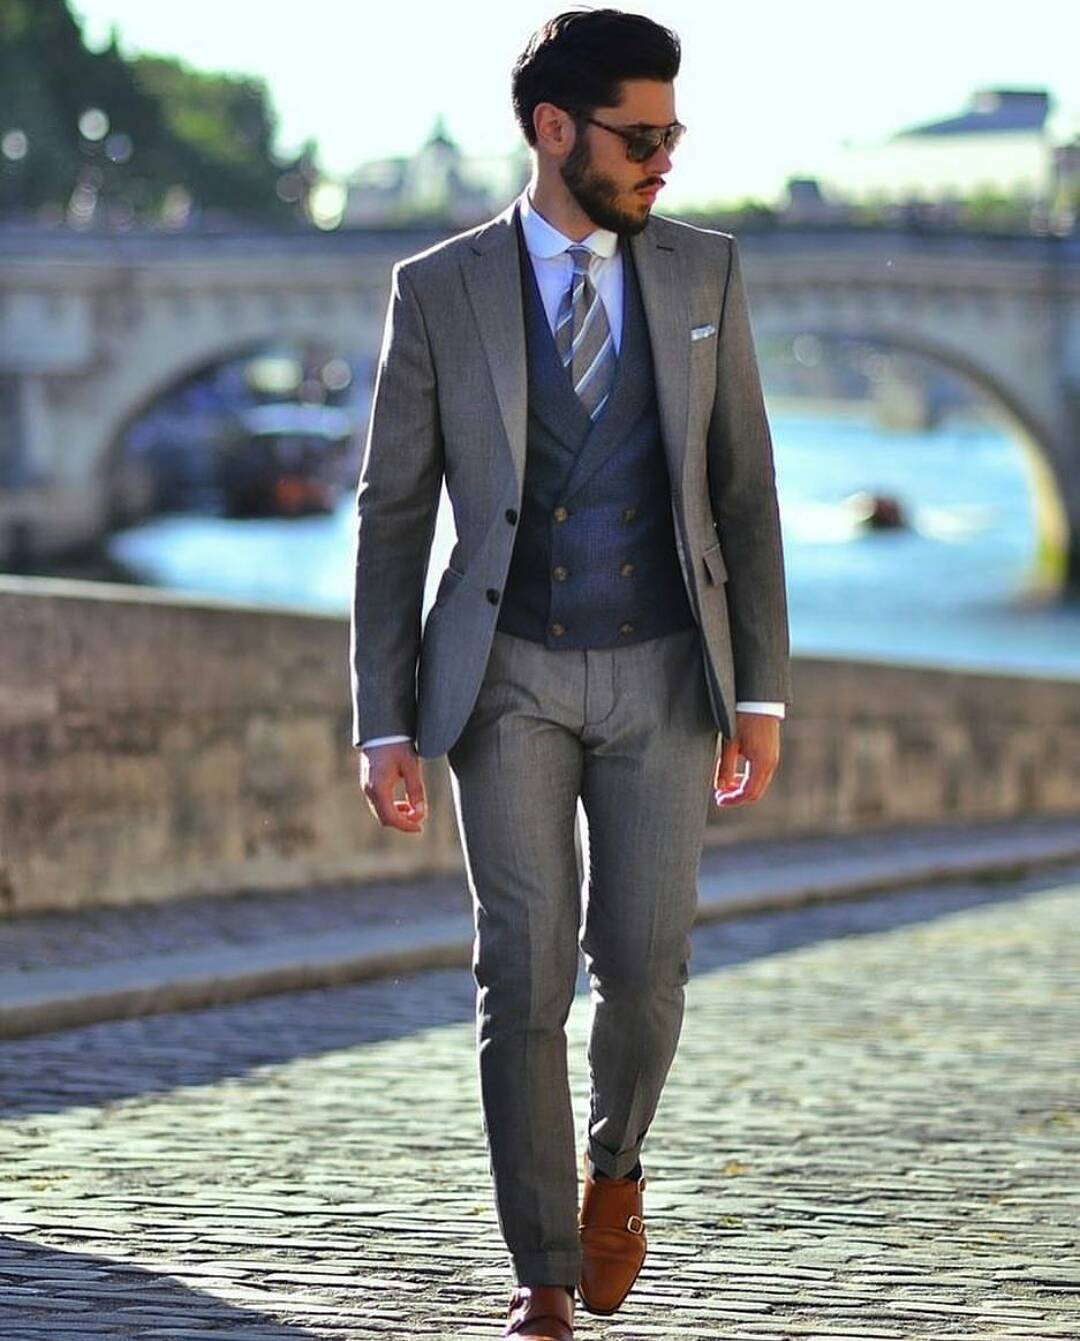 Cocktail party Outfits For Guys | Dresses Images 2022